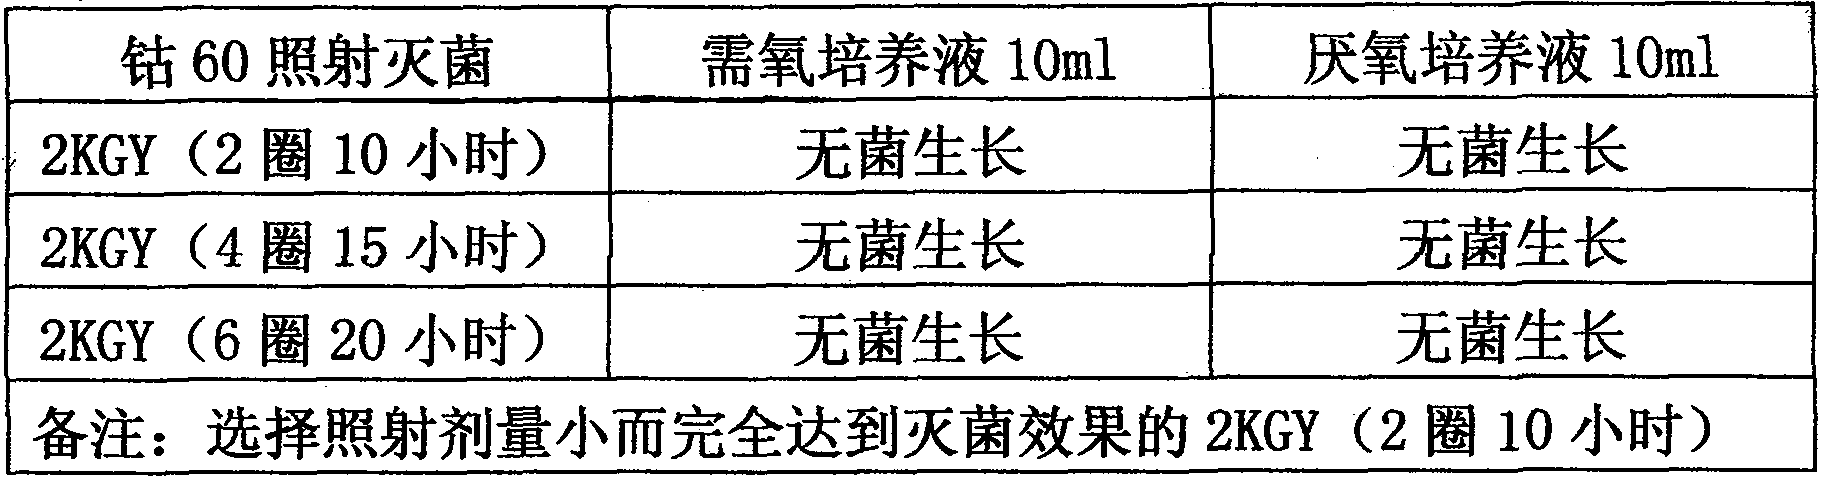 Intestinal enriched tablet culture medium and process method thereof